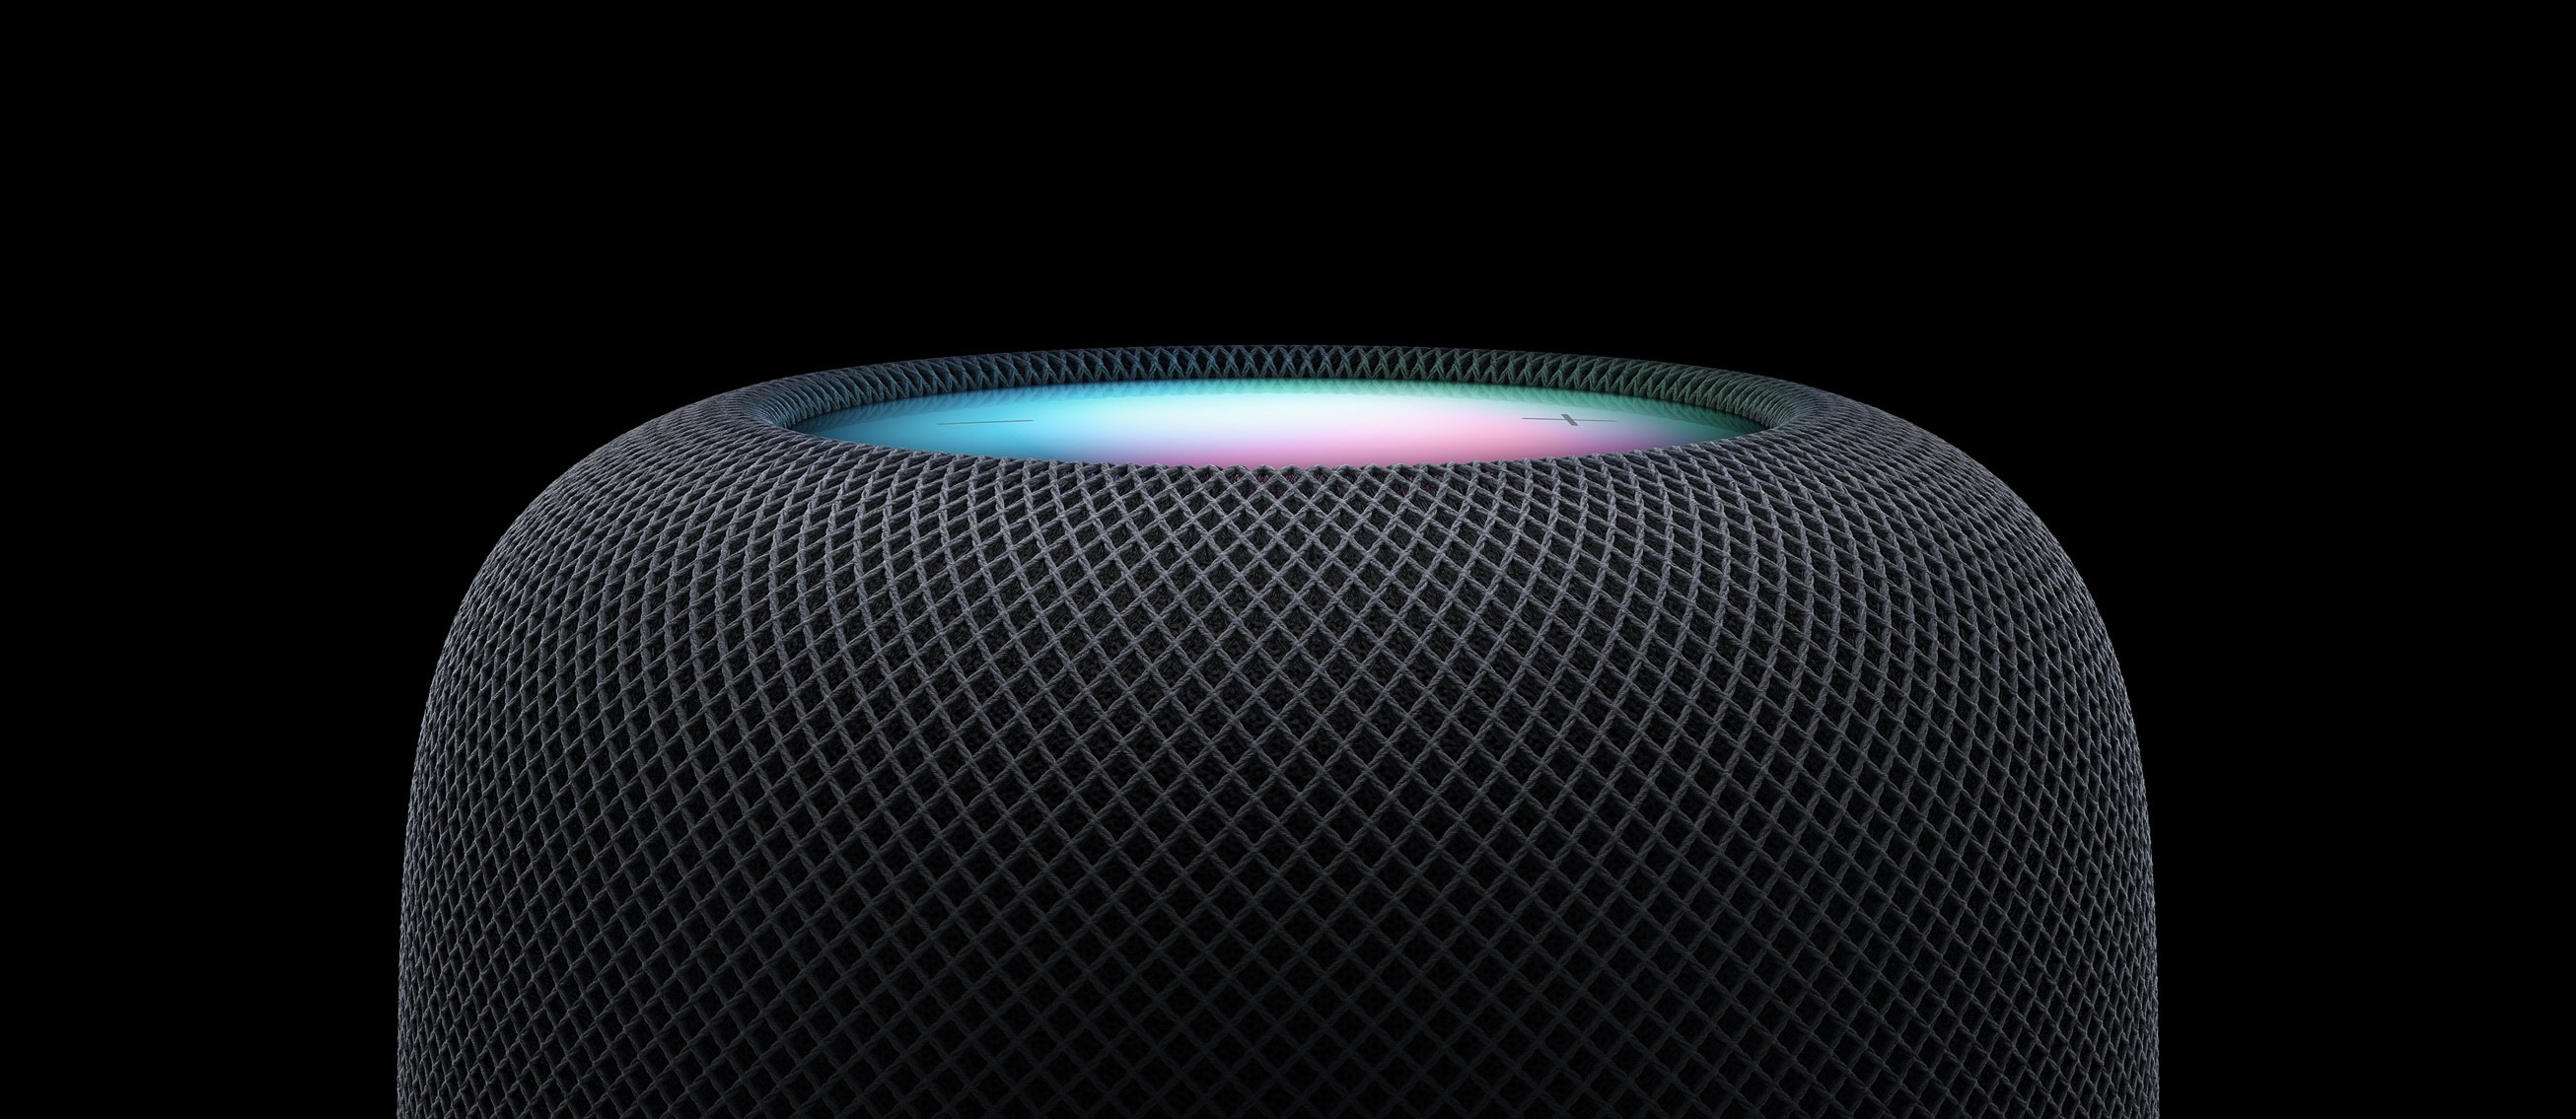 Apple updates HomePod software to version 16.3